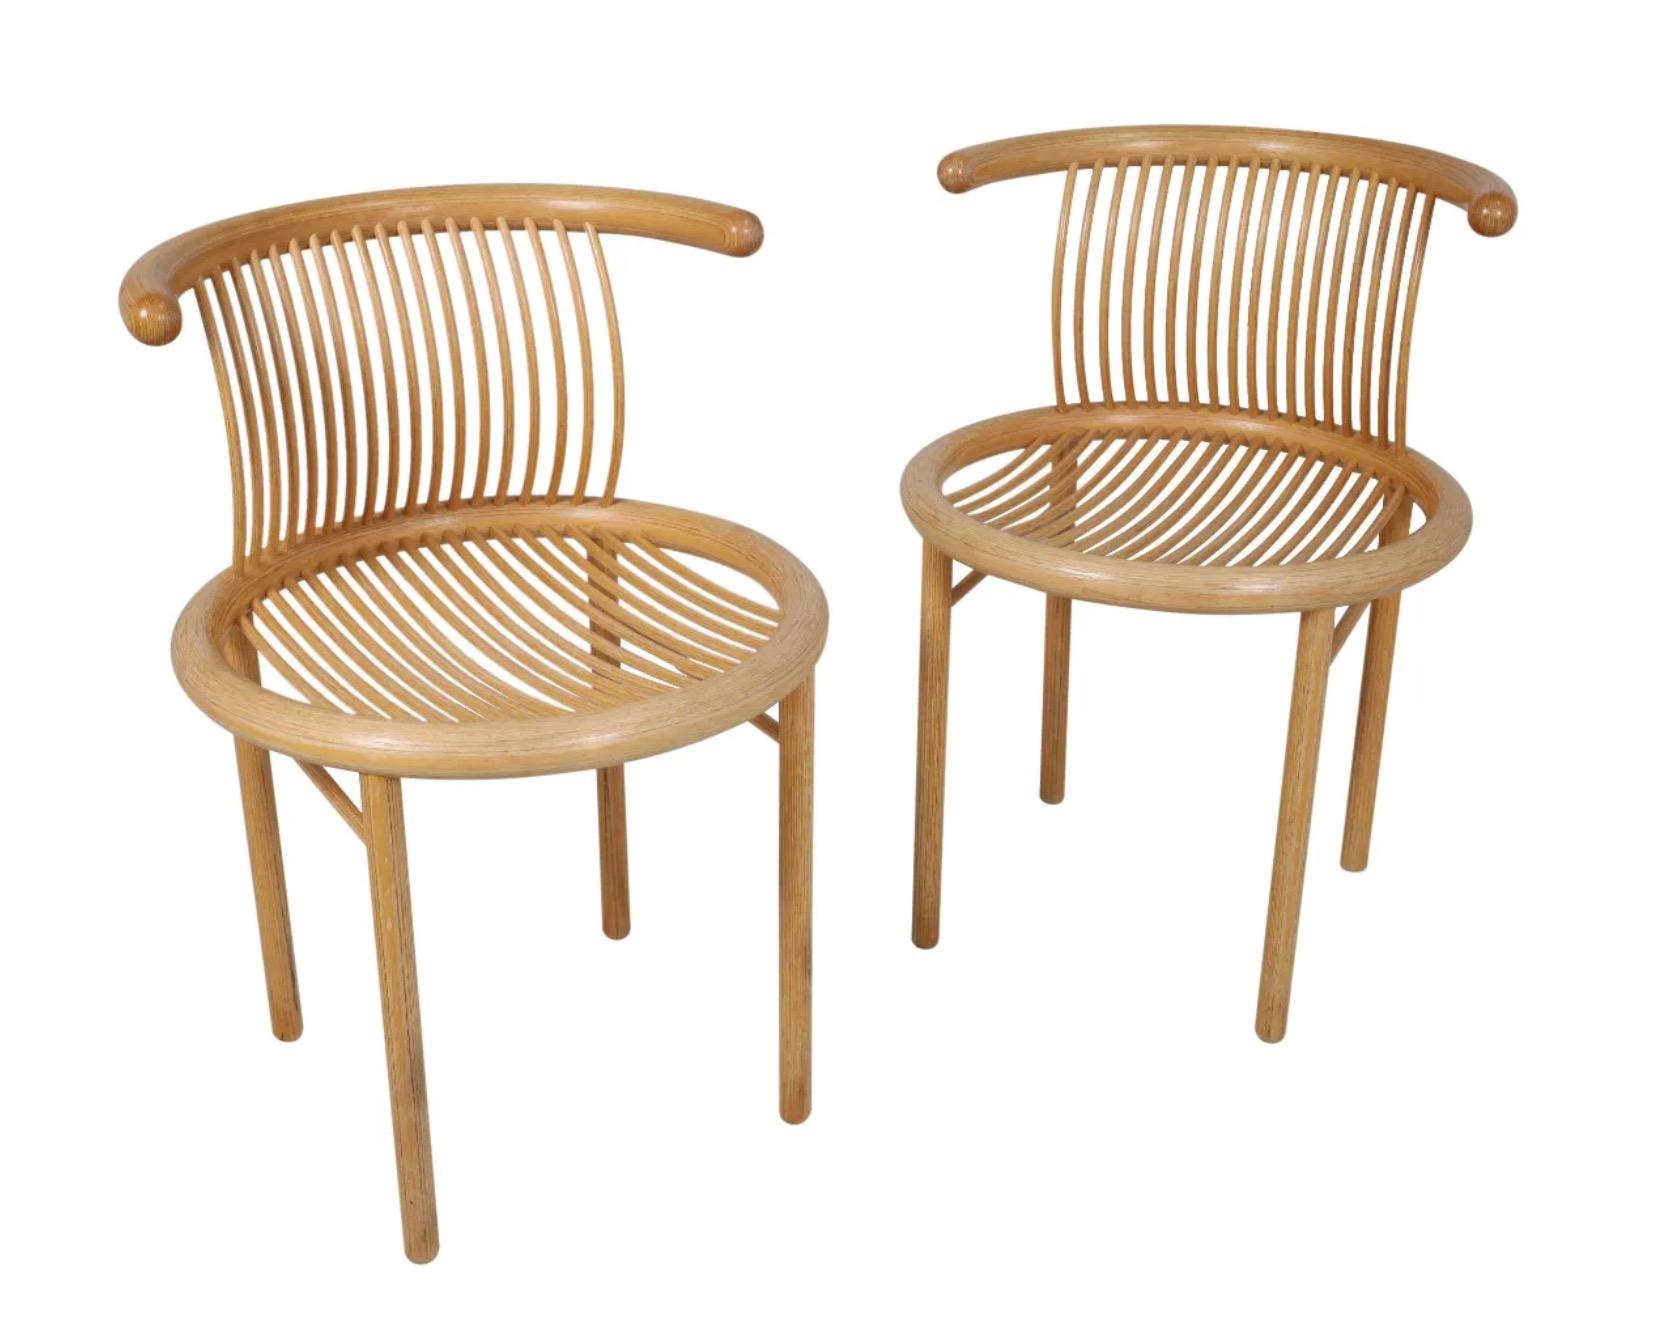 Set of 2 dining chairs by Helmut Lübke, made in Germany circa 1960's. The chairs are in excellent, original condition, showing only light cosmetic wear, normal and consistent with age. Signed Lübke (see image). Priced and offered as a pair. 

Only